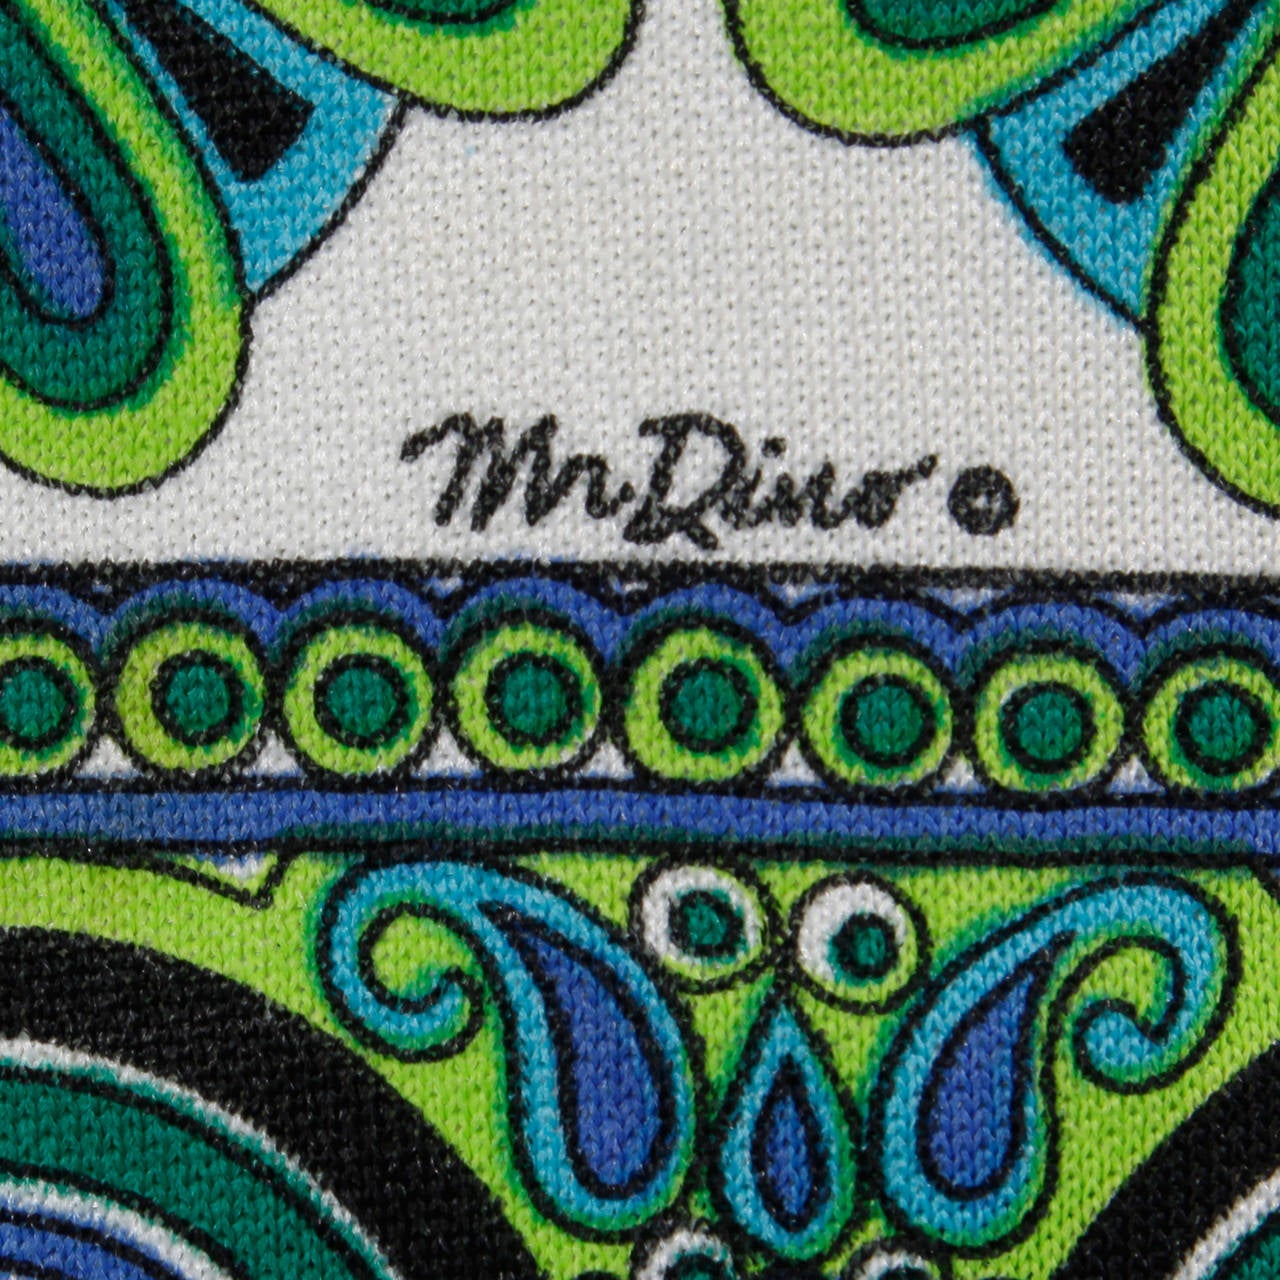 Collectible vintage Mr. Dino dress that is signed in the print. Flared sleeves and vibrant design.

Details:

Unlined
Back Zip and Hook Closure
Marked Size: 14
Estimated Size: Large
Color: Neon Green/ Bright Purple/ Bright Azure Blue/